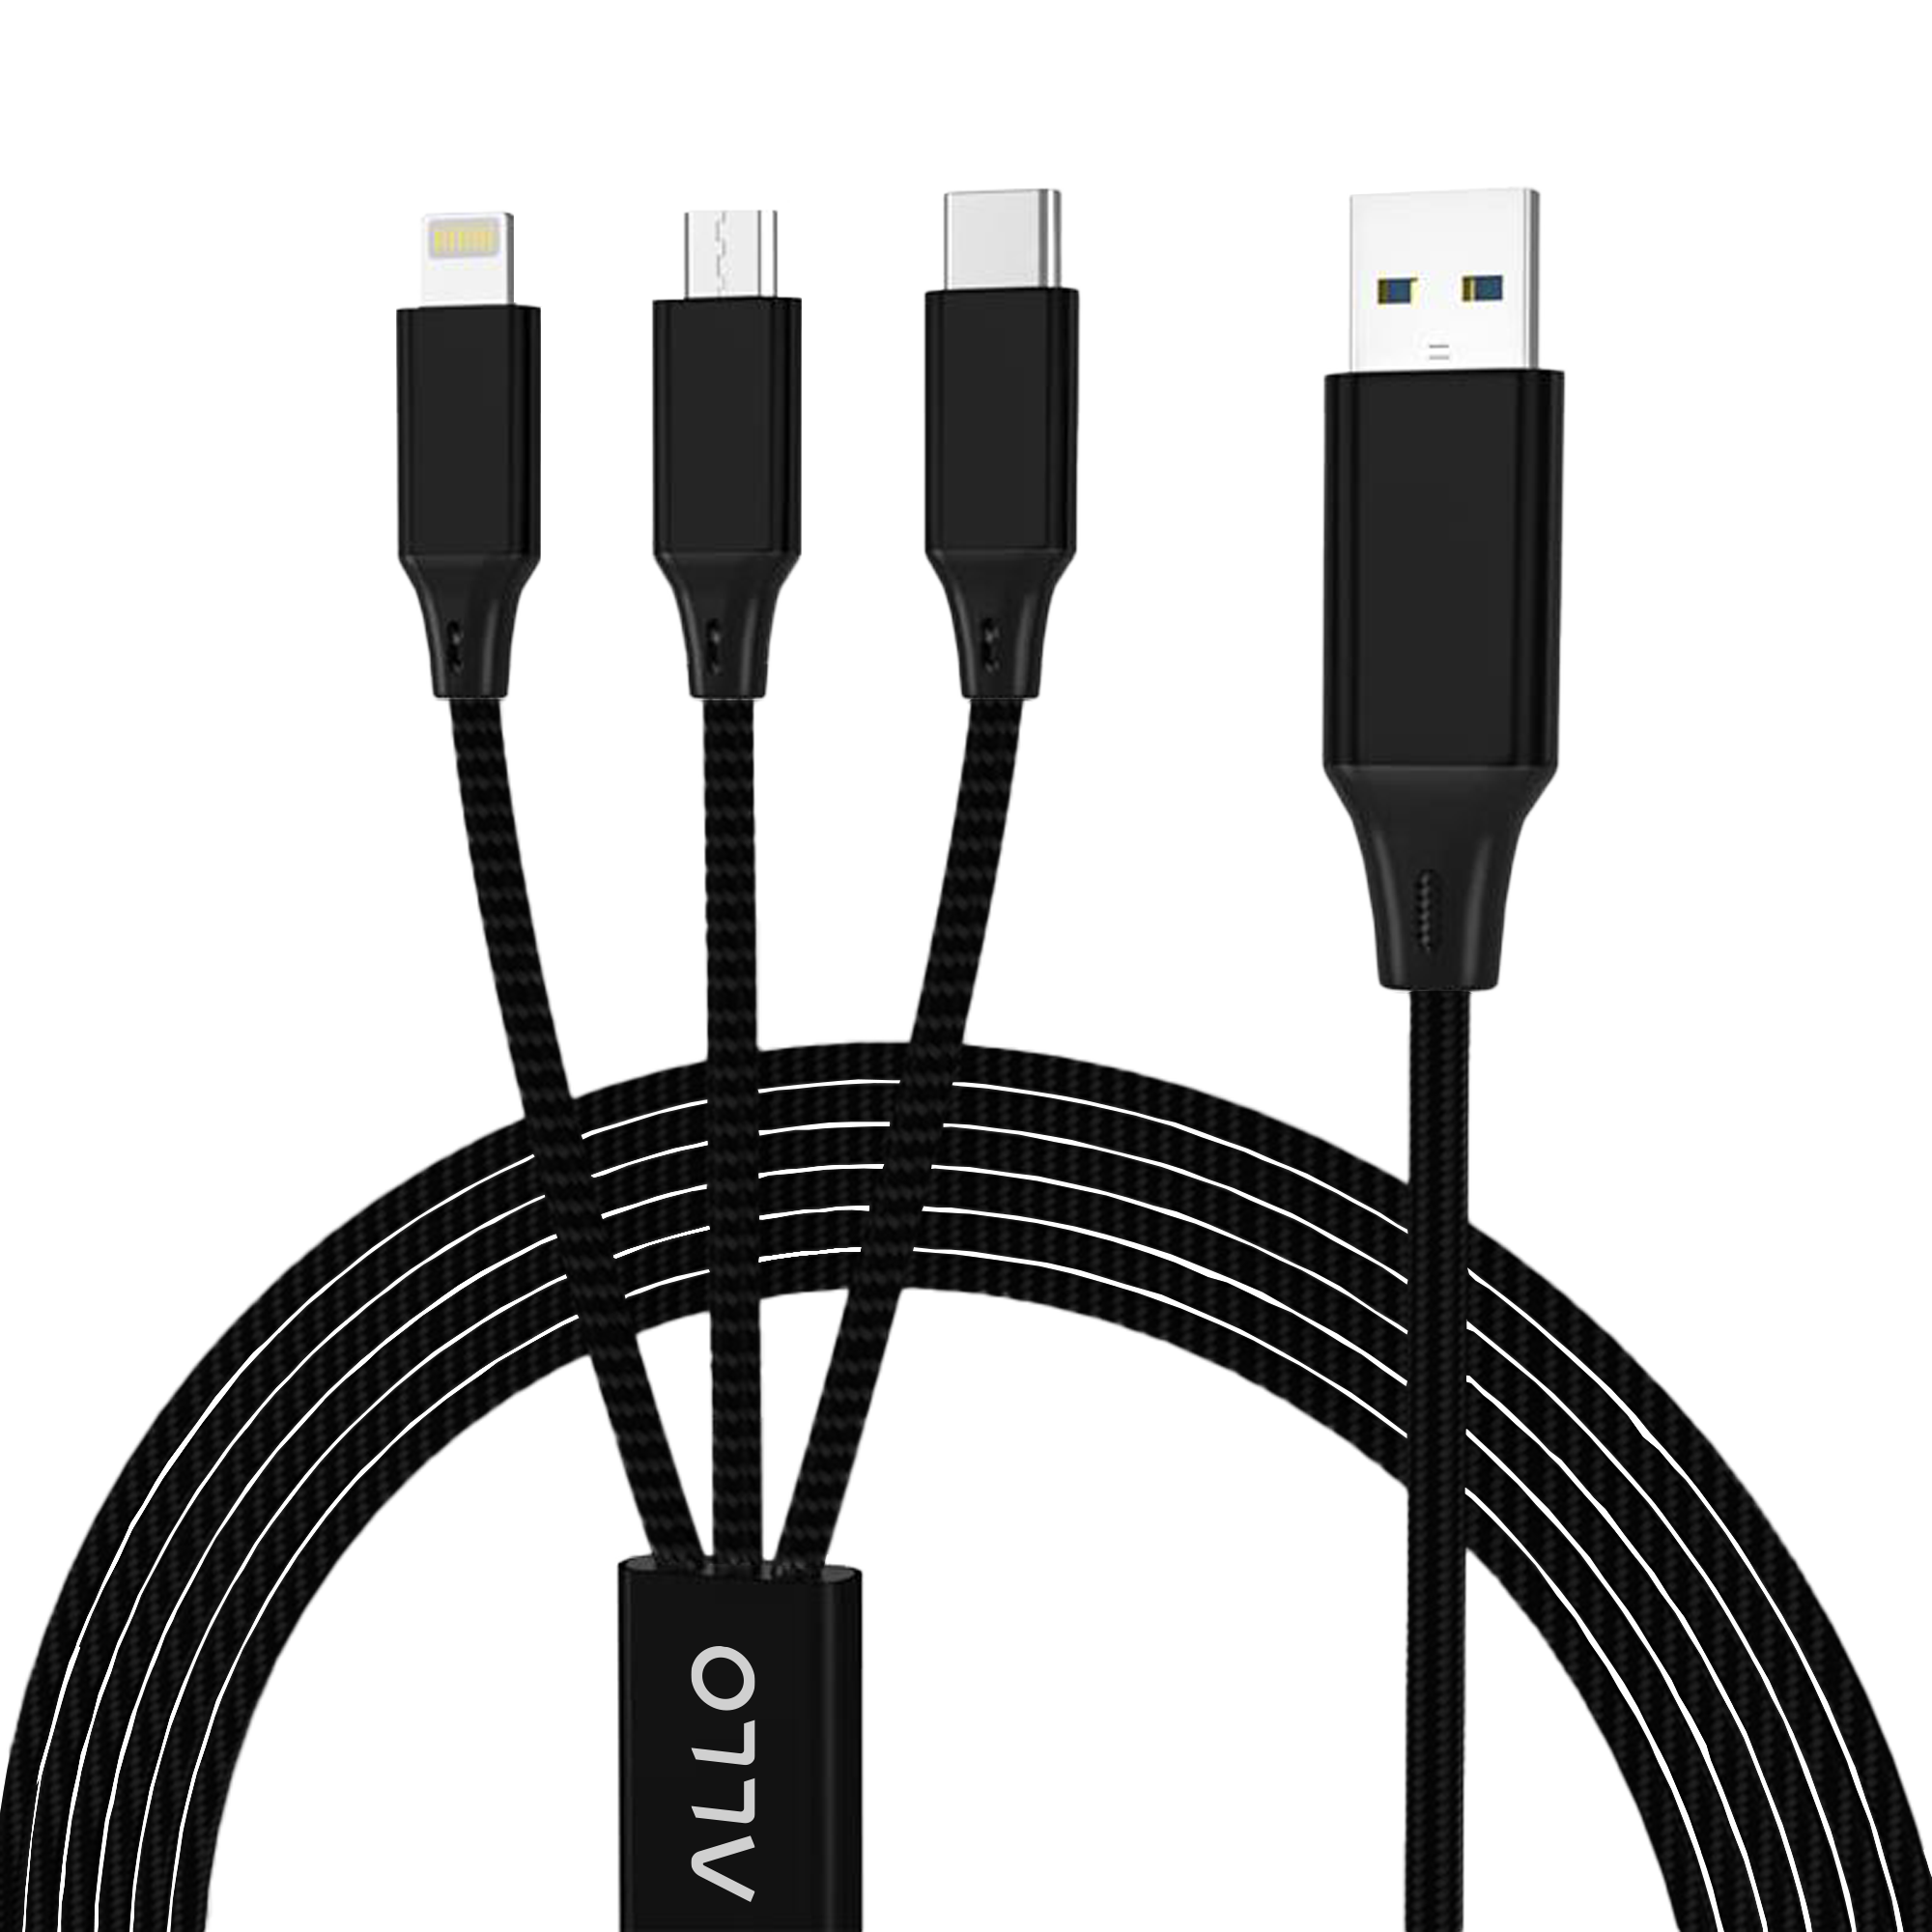 Allo 3 in 1 USB Charging Cable